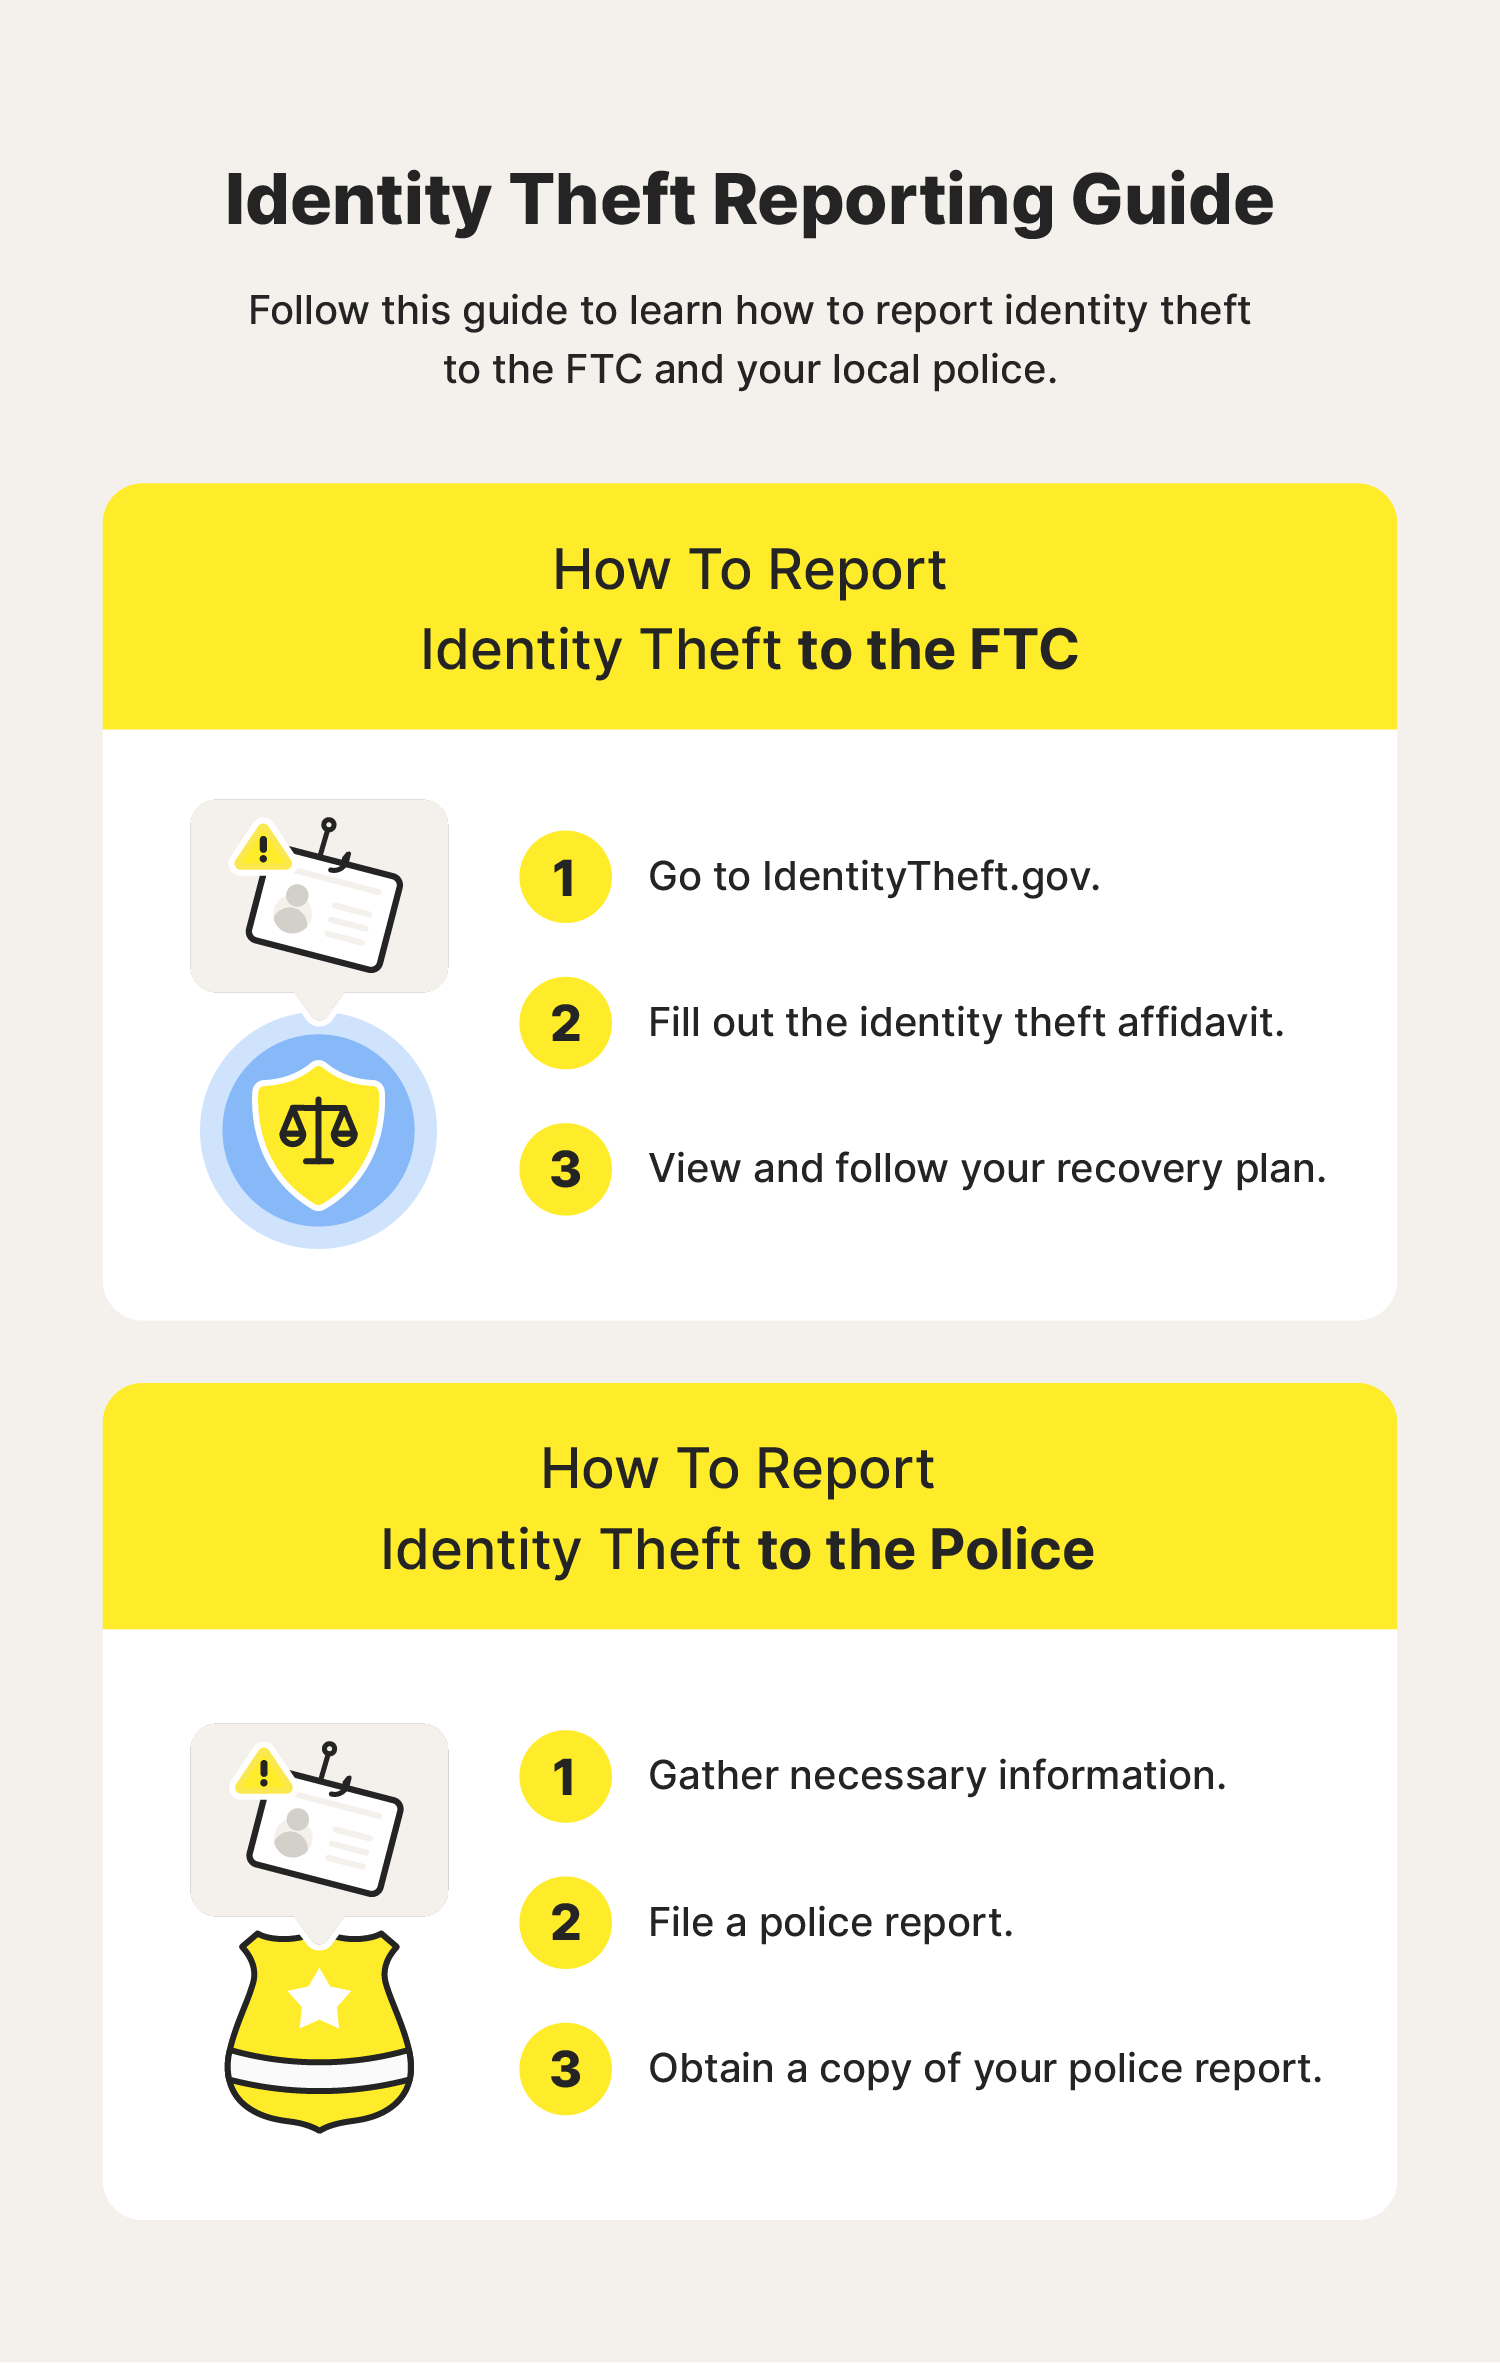 A graphic showcases step-by-step instructions for how to report identity theft to the FTC and the police.